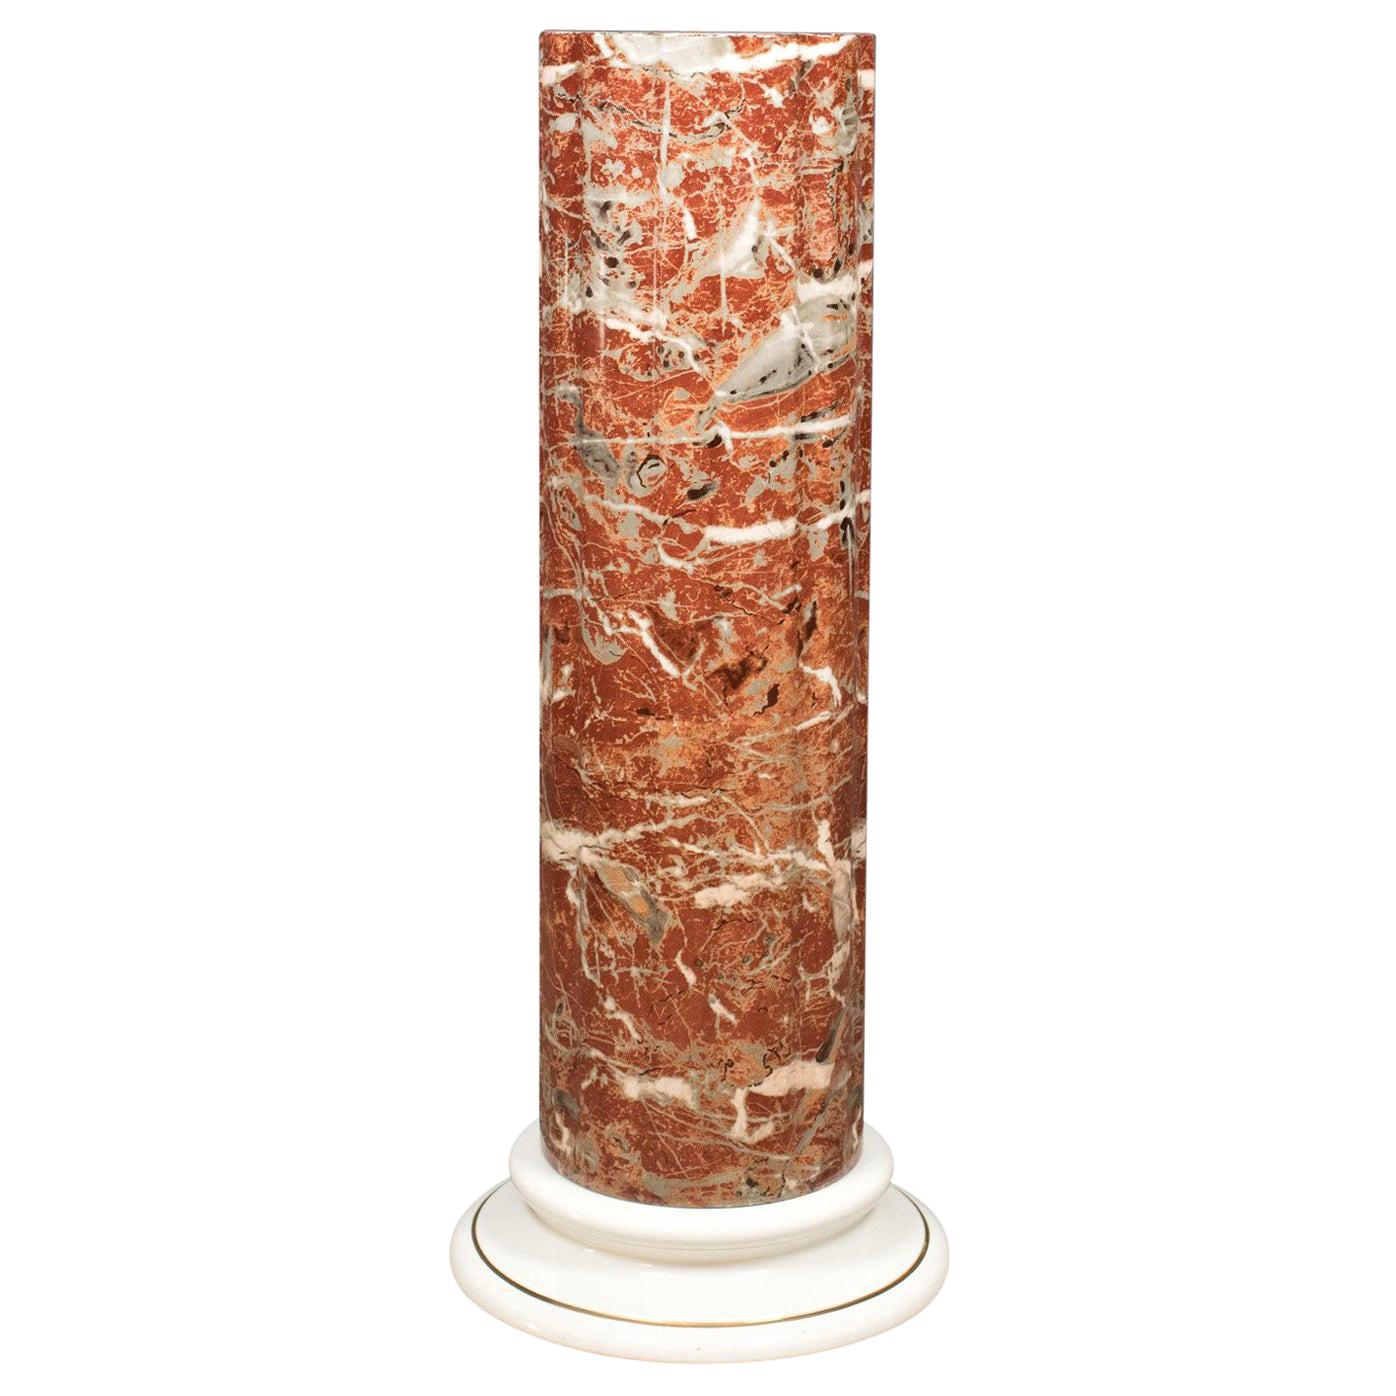 Ceramic Pedestal with Rouge Marble Effect Finish, Late 20th Century Plant Stand